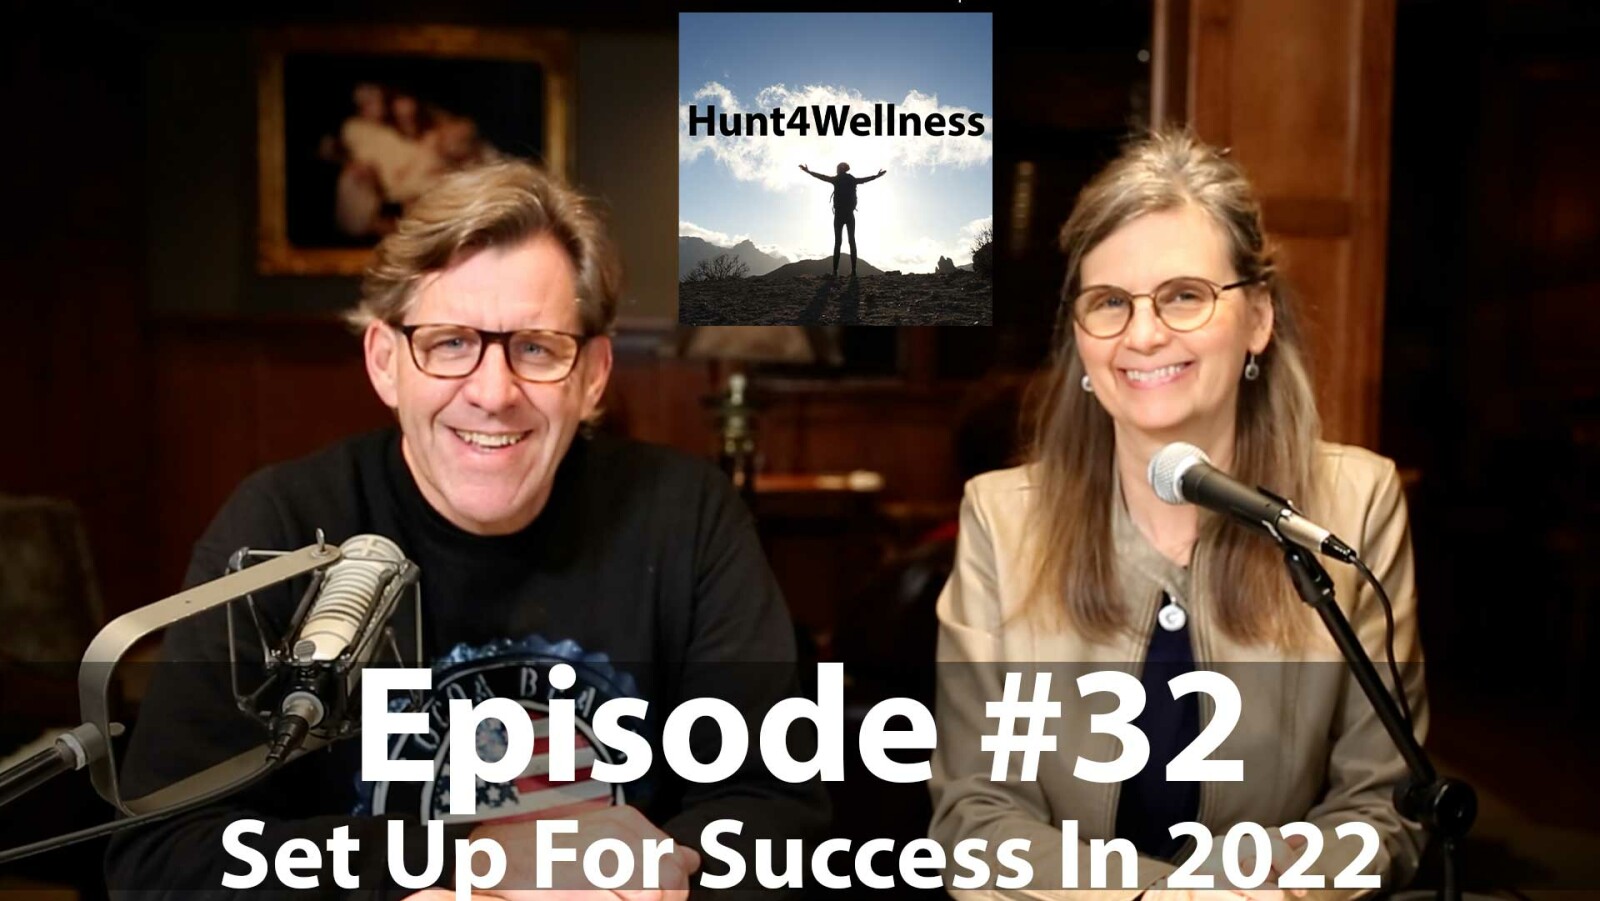 Episode #32 - Set Up For Success in 2022